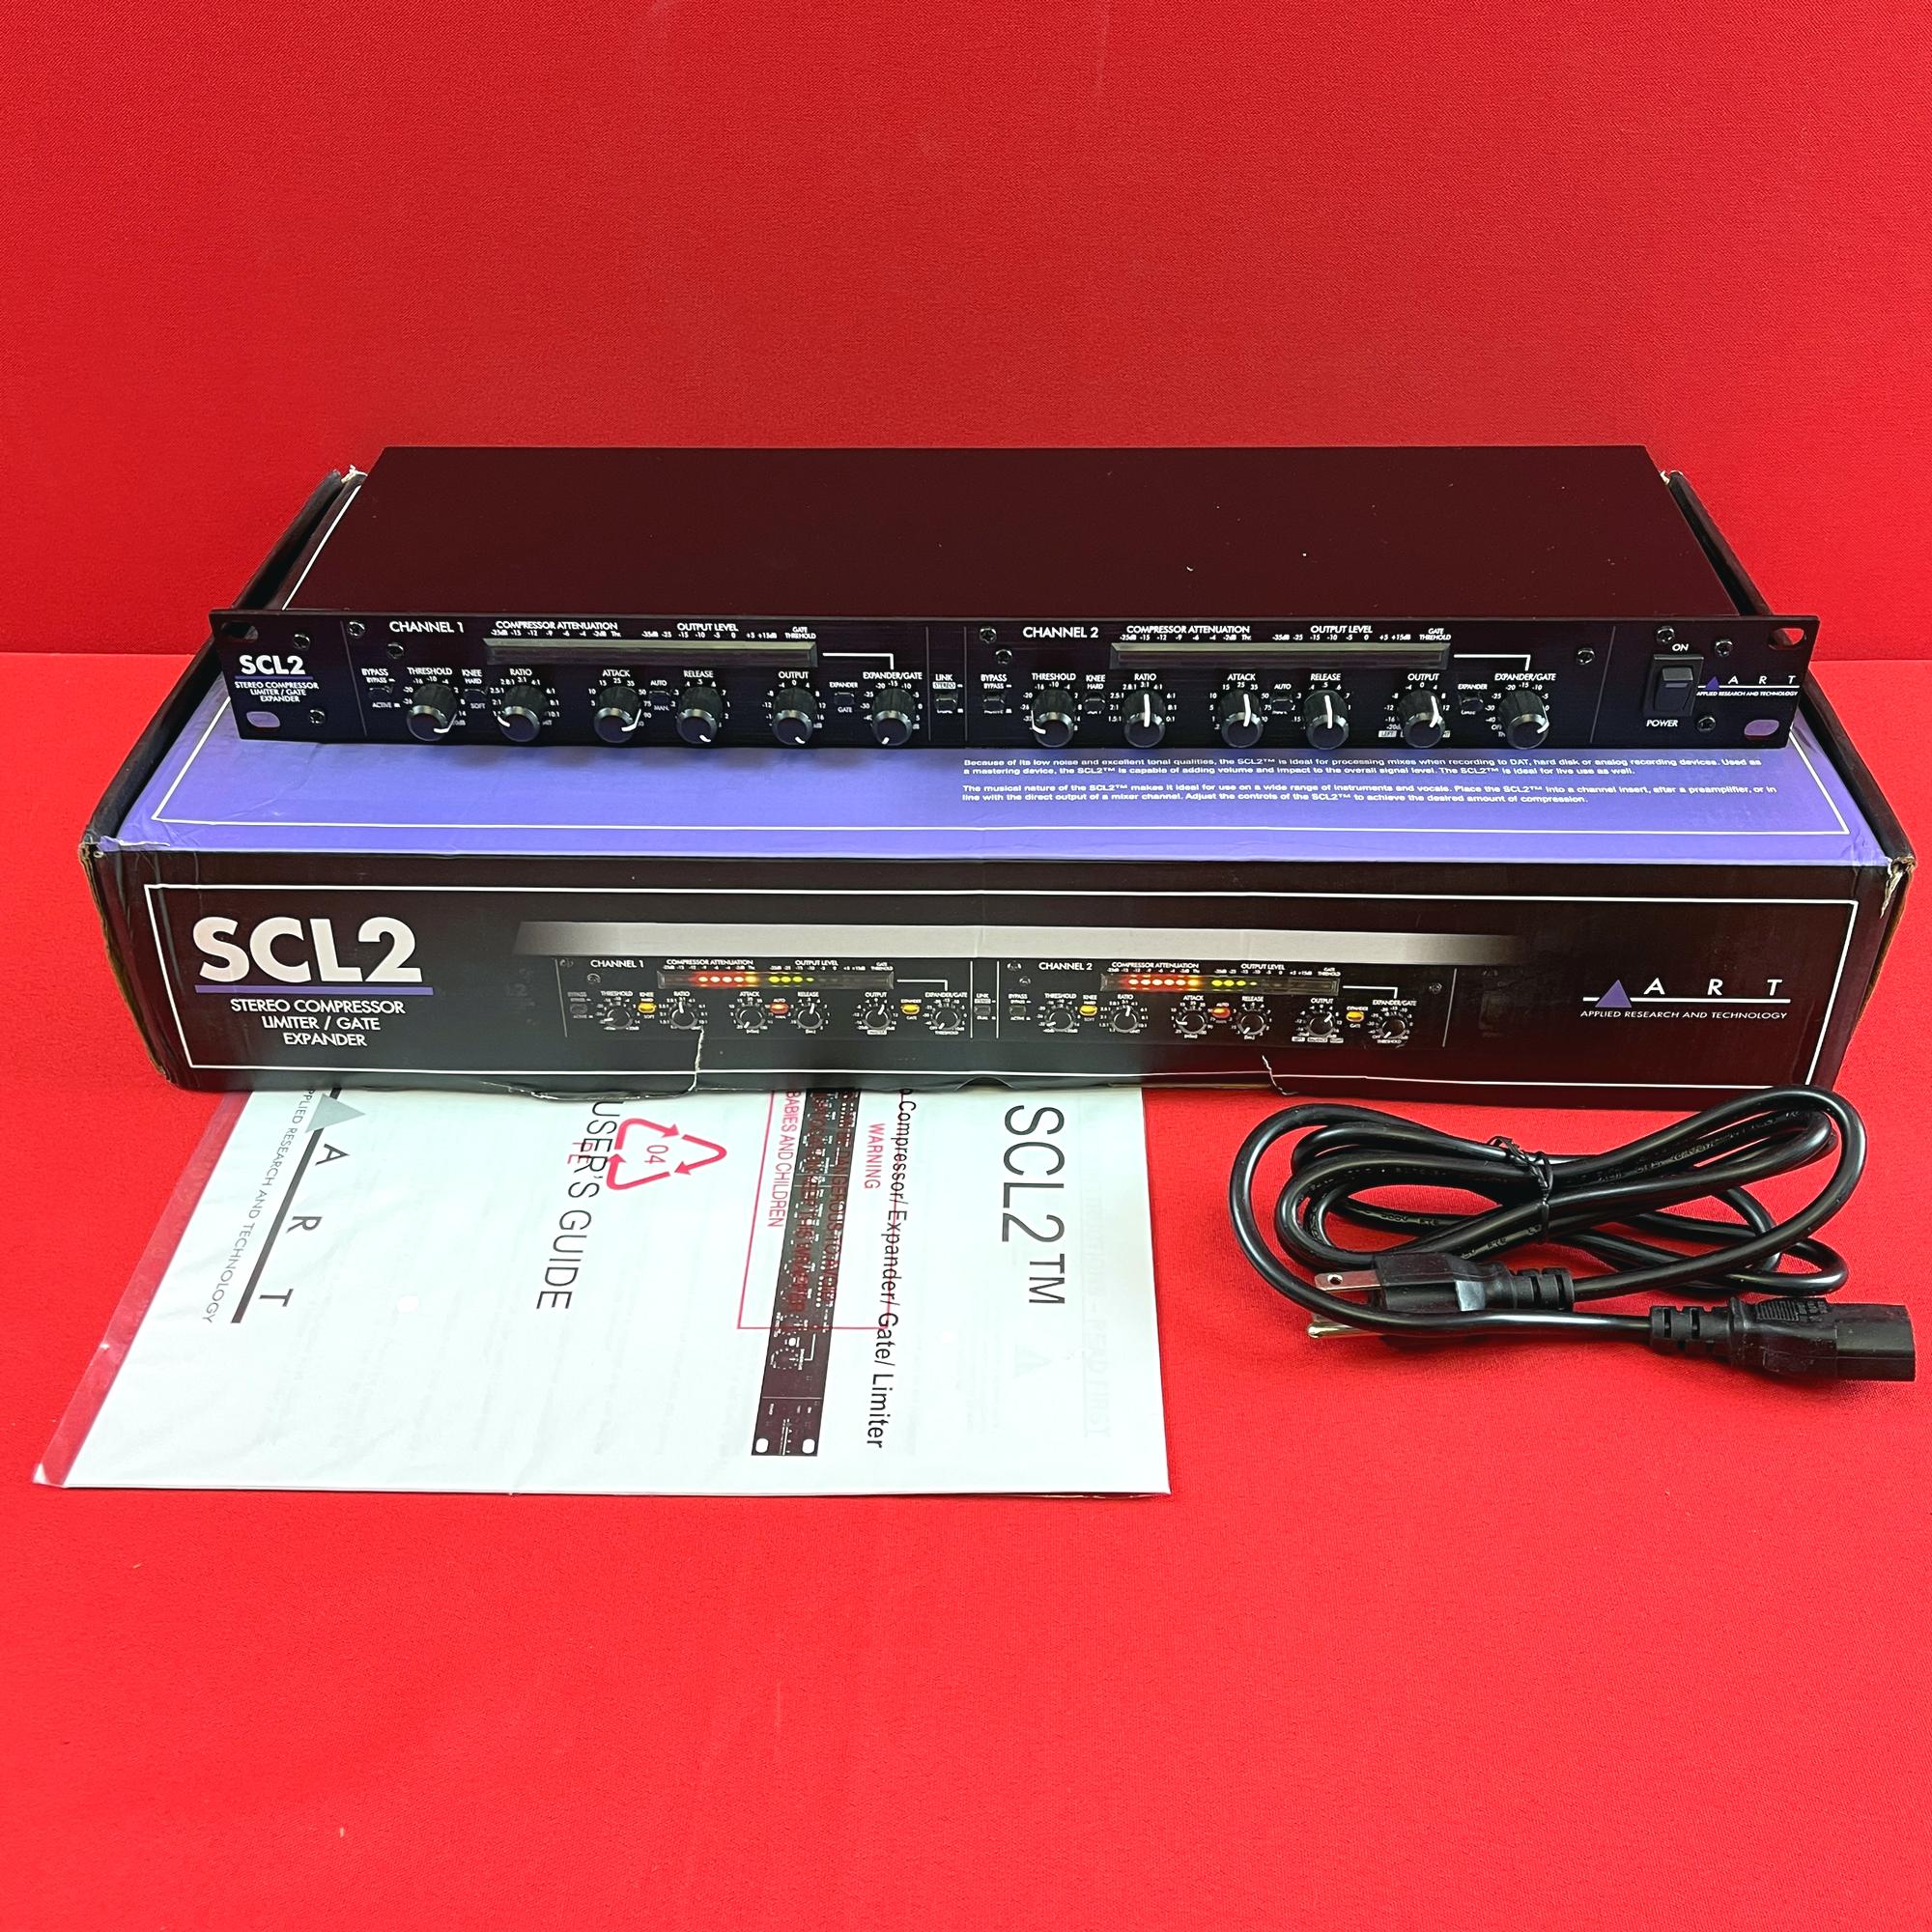 [USED] ART SCL2 Dual / Stereo Compressor / Limiter Expander / Gate